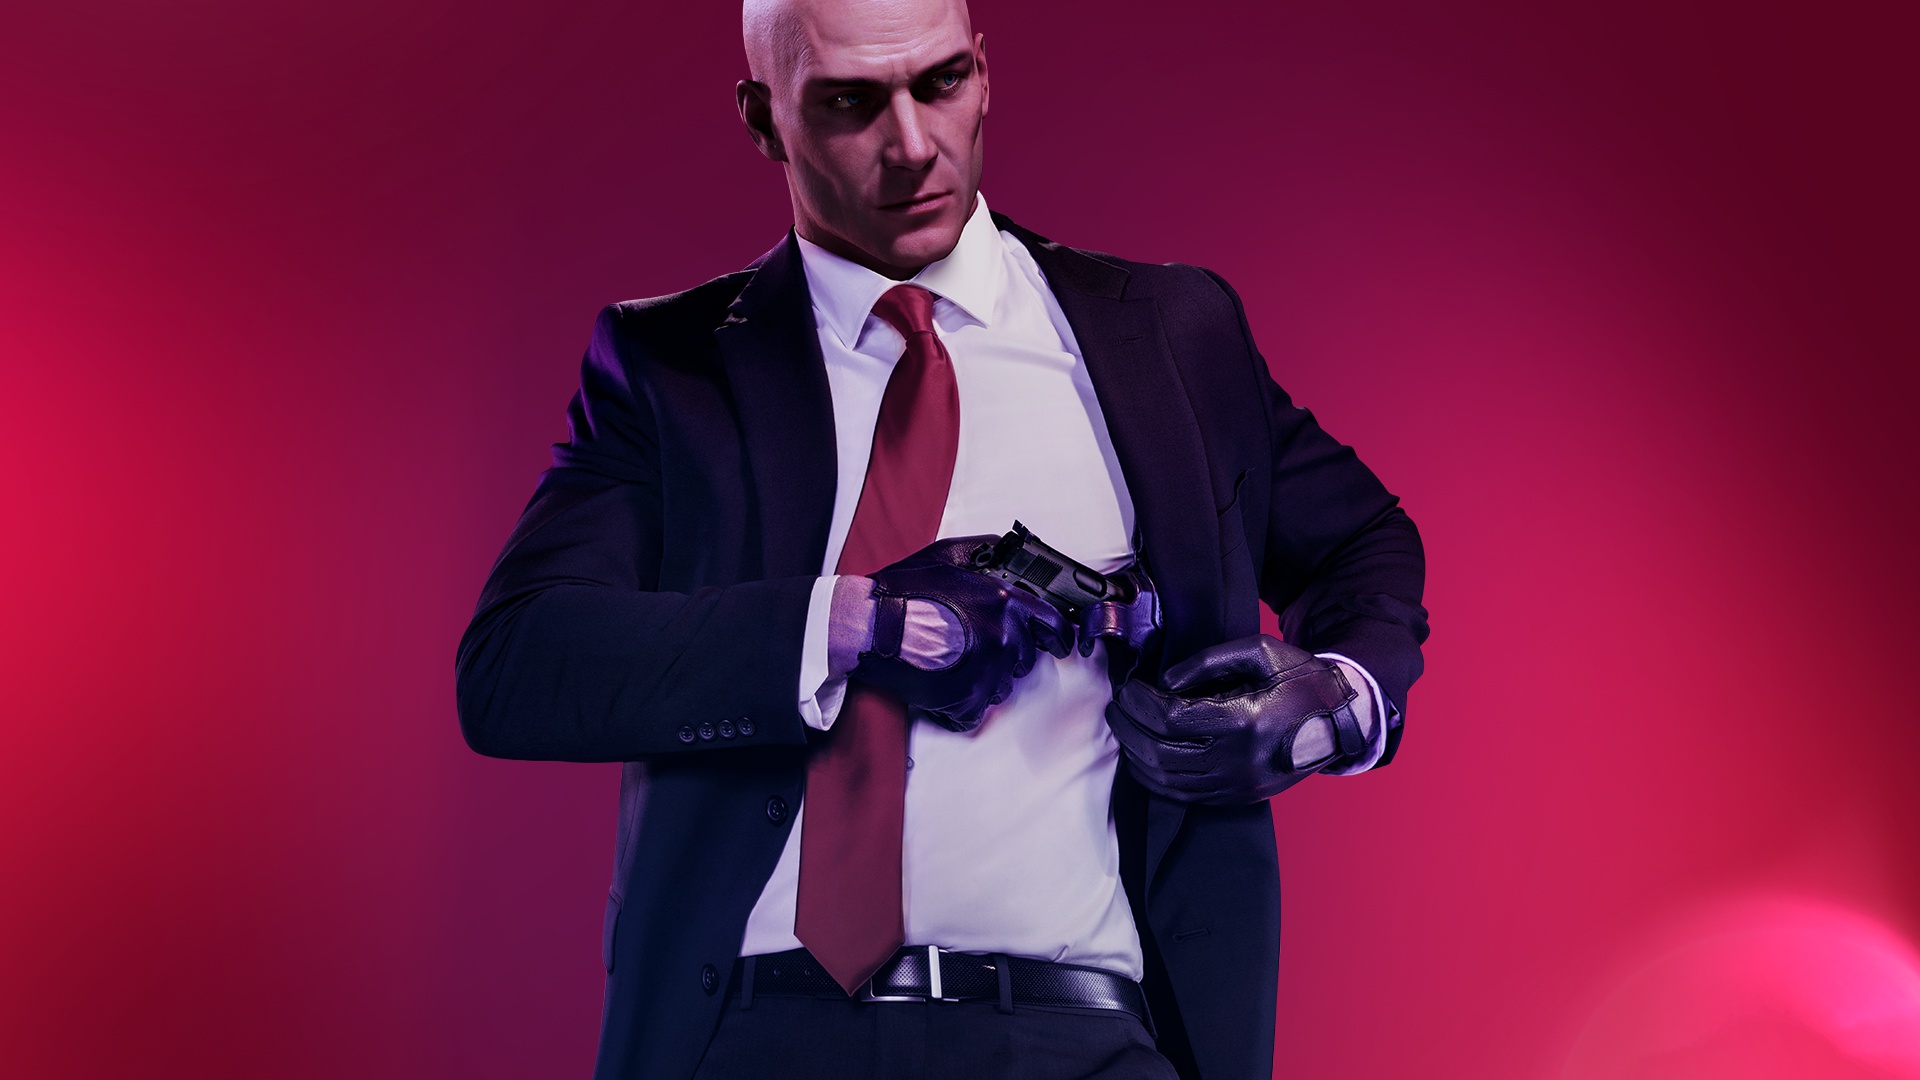 Hitman Video Games Codename 47 Suits Pink Red Tie HiTMAN 2 Red 1920x1080